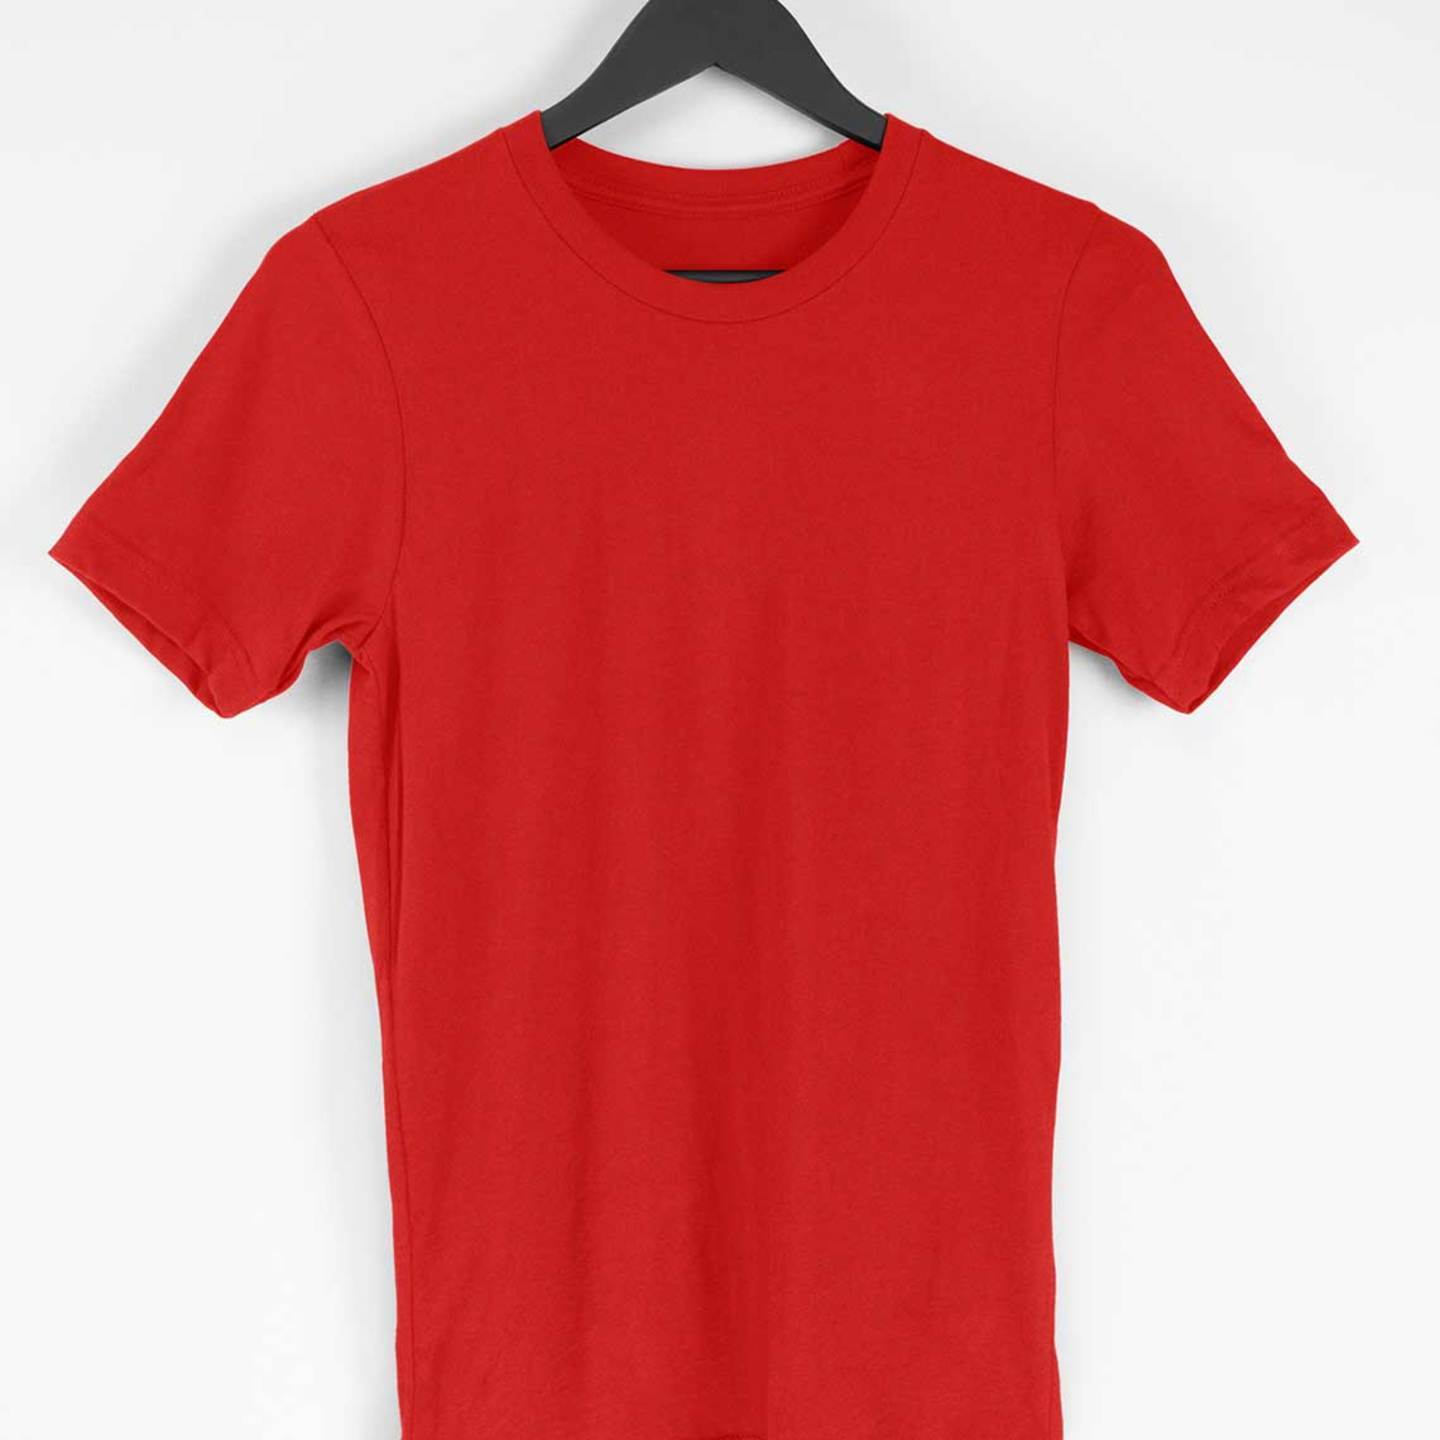 Solid Red Tee